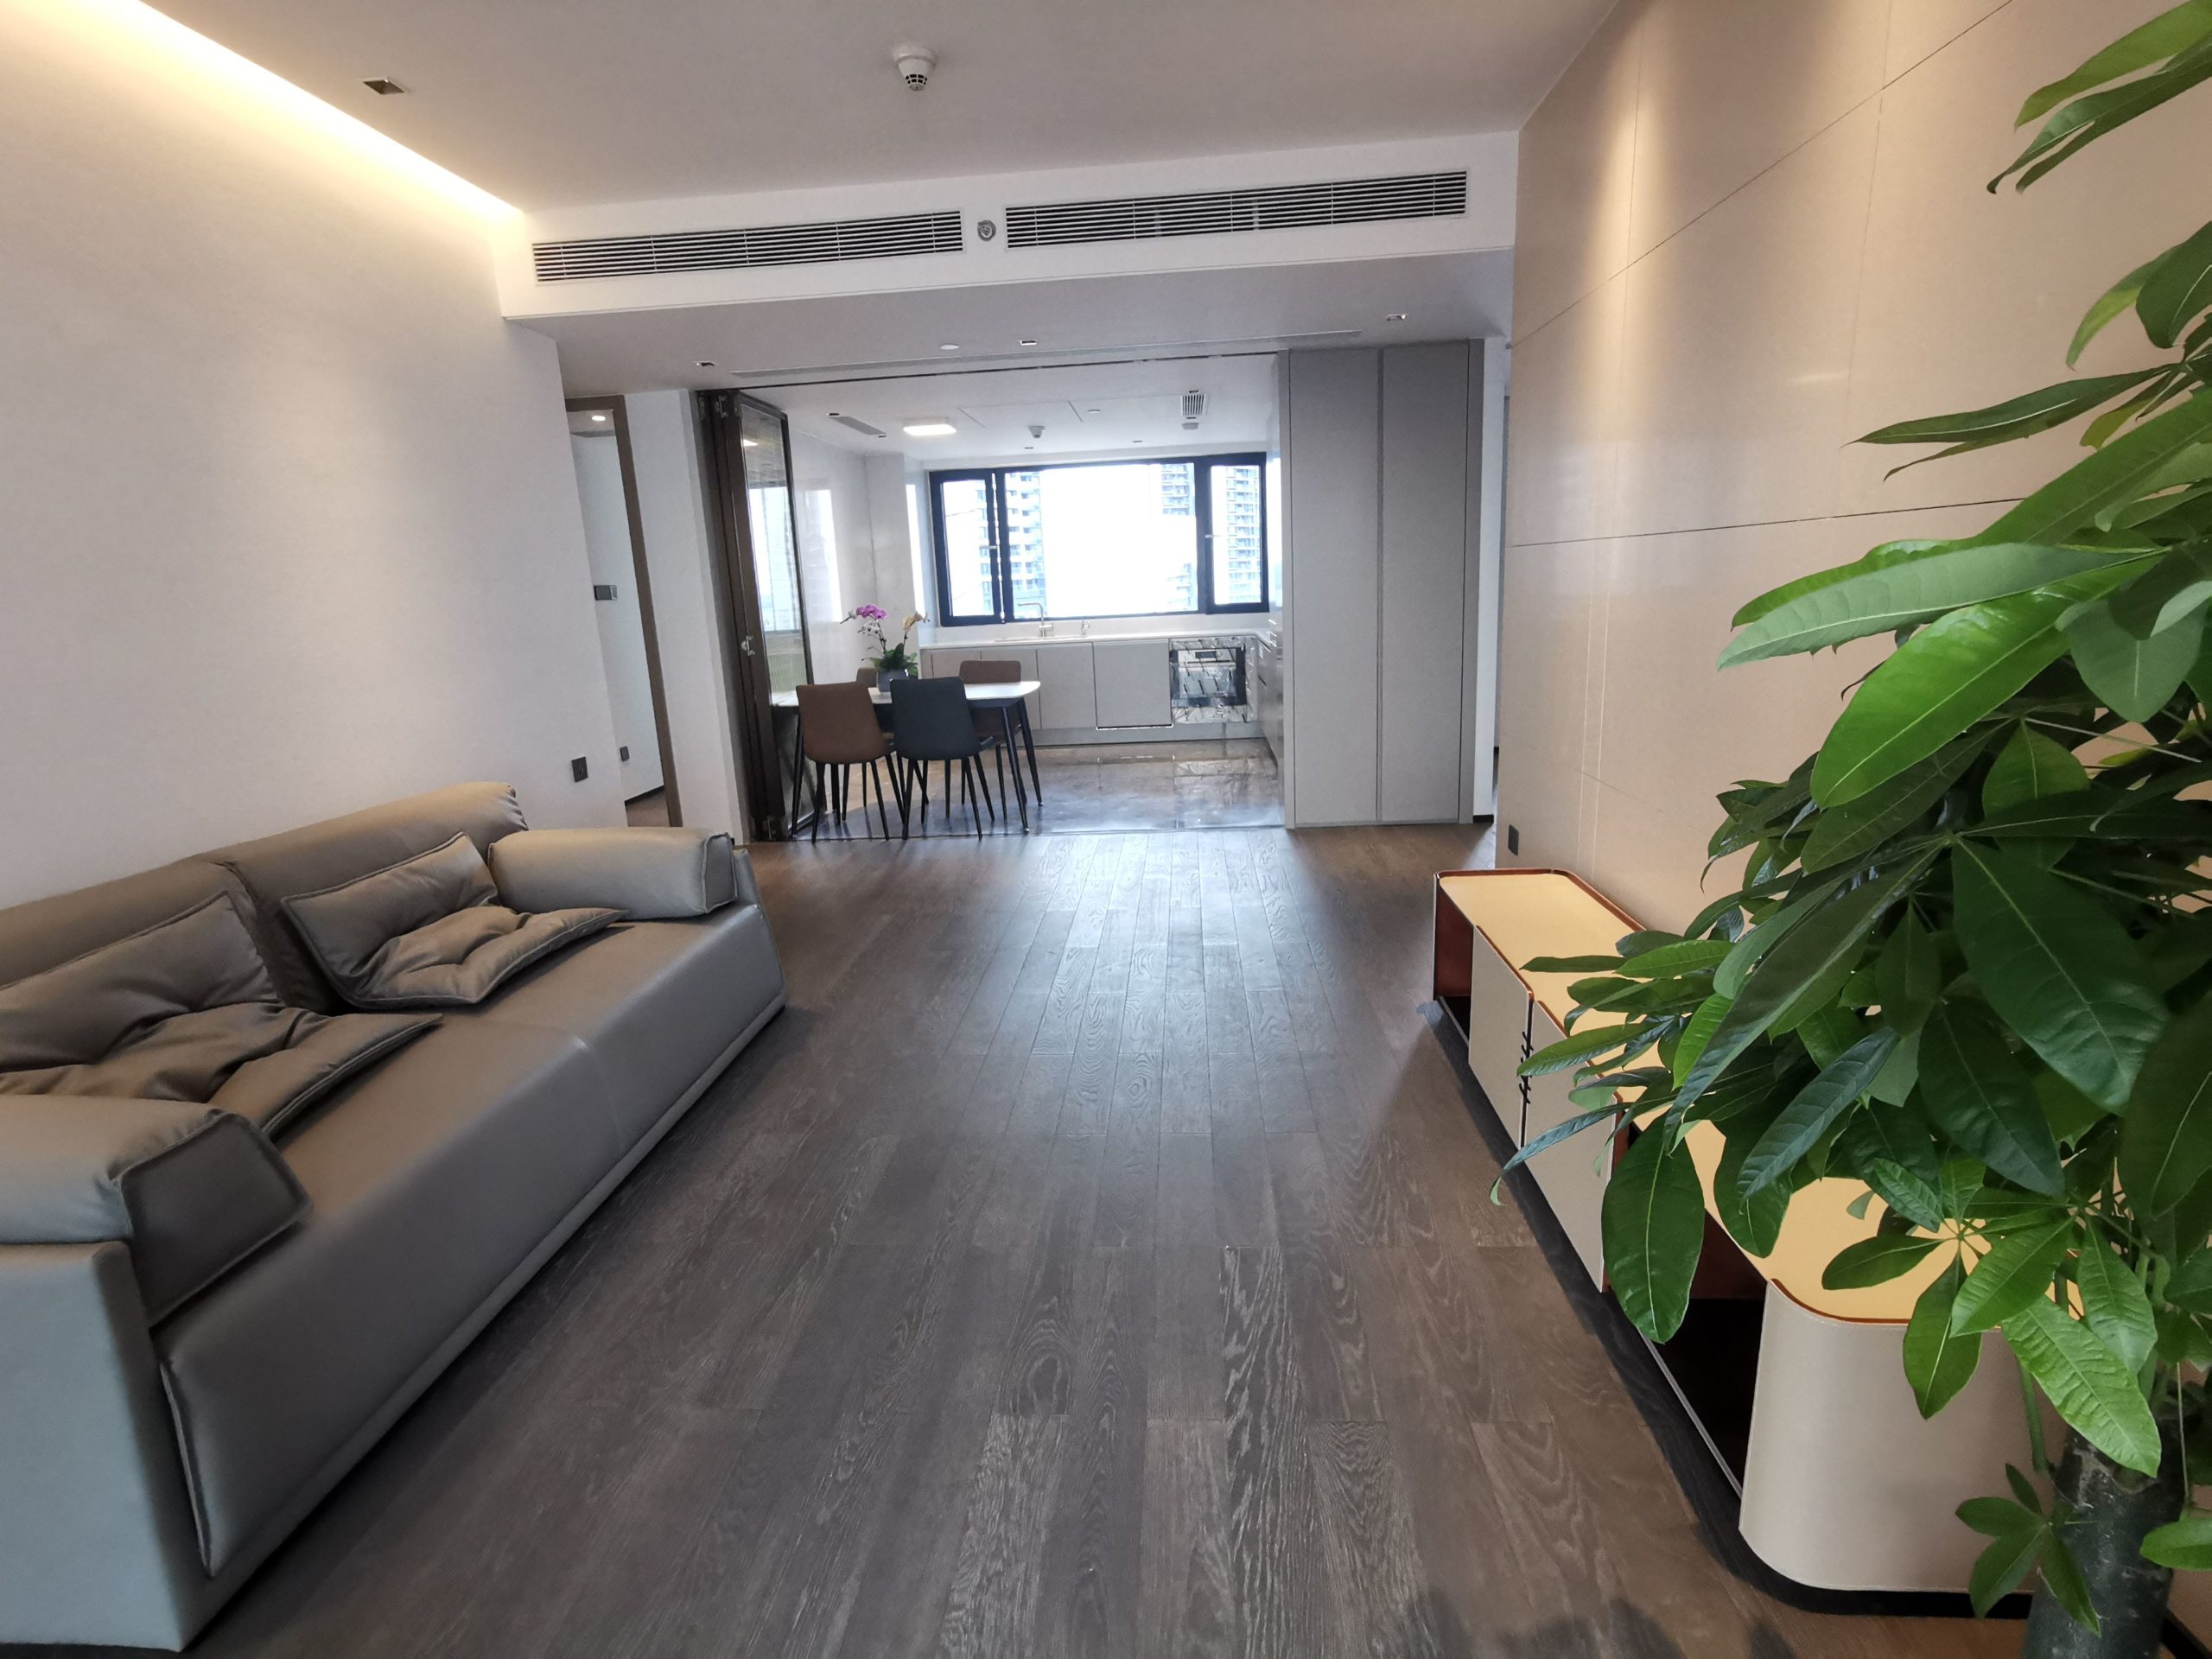 Featured image for “cosy and clean apt in good condition nearby the Wanxia Metro station”